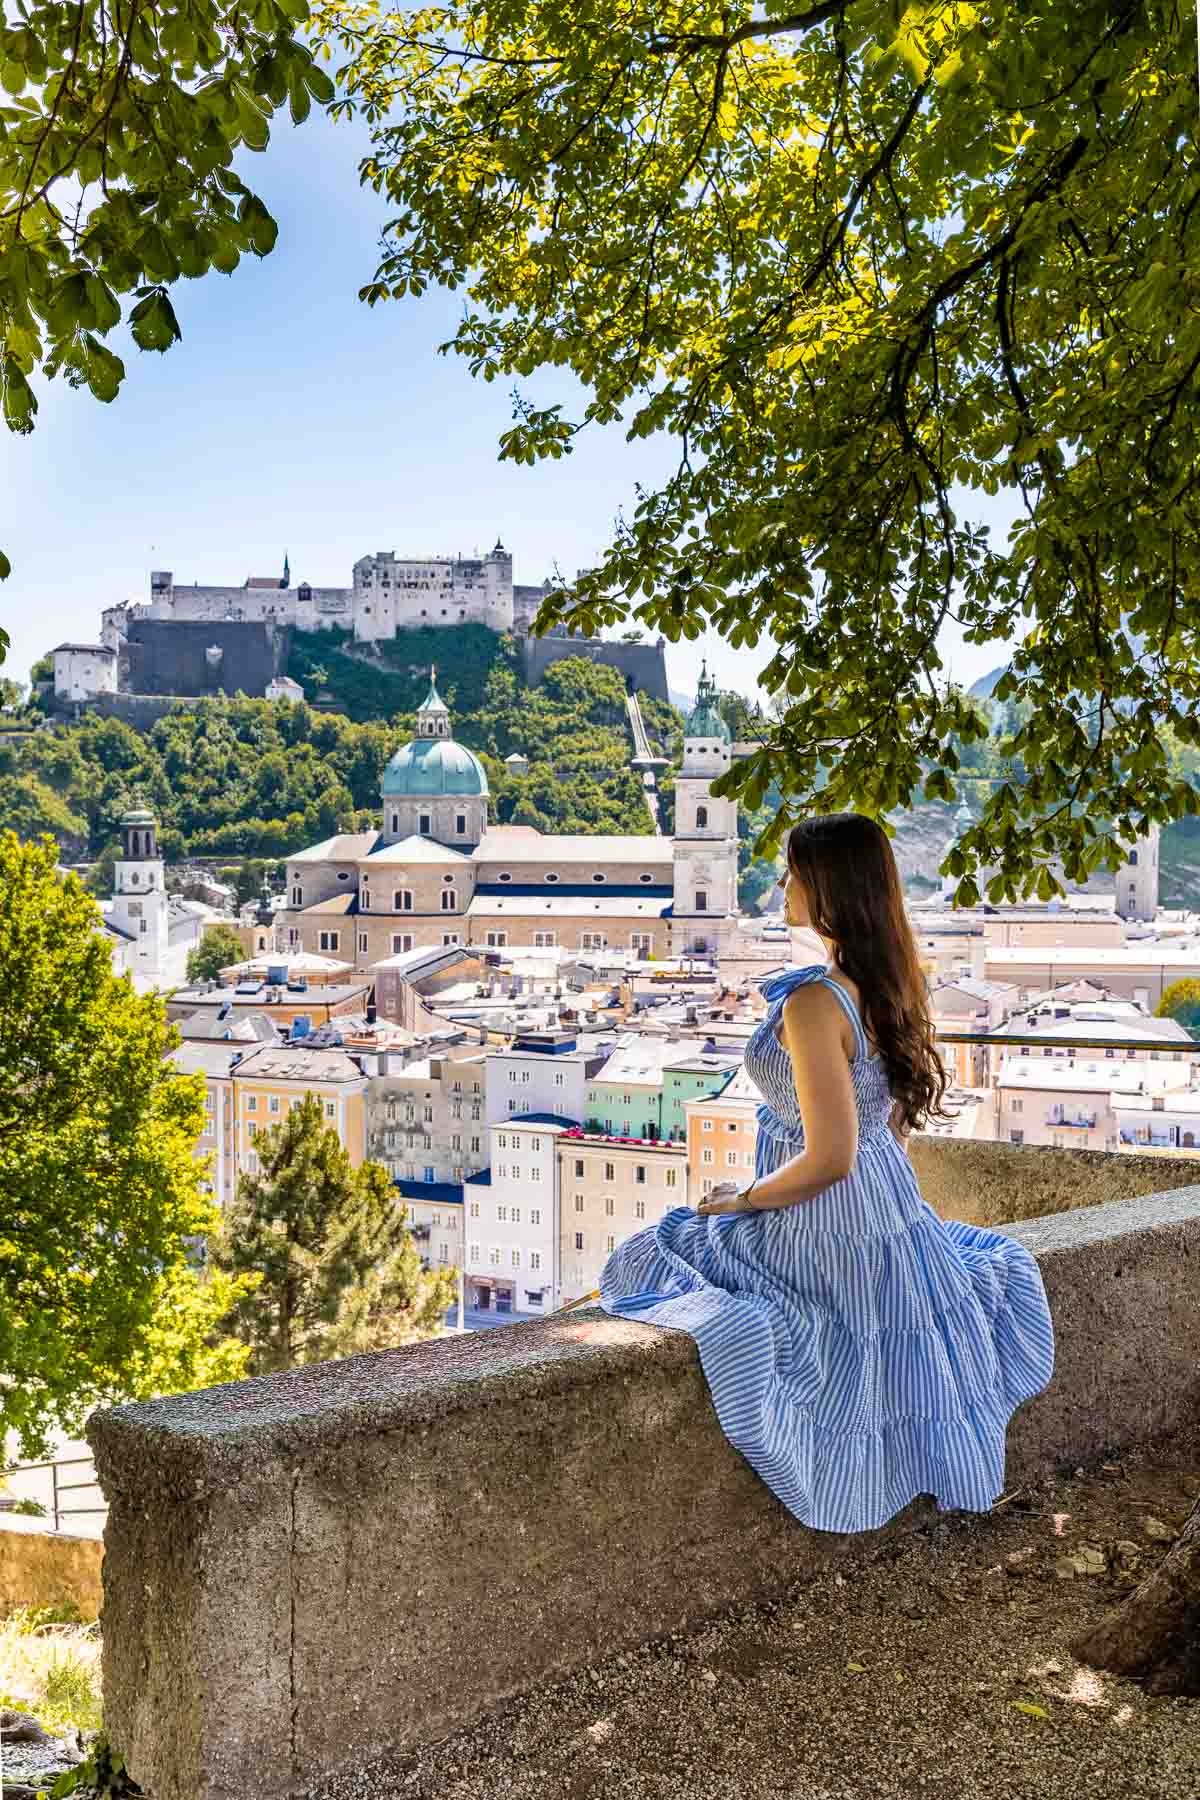 Panoramic view of Salzburg from the Kapuzinerkloster viewpoint with girl in a blue dress